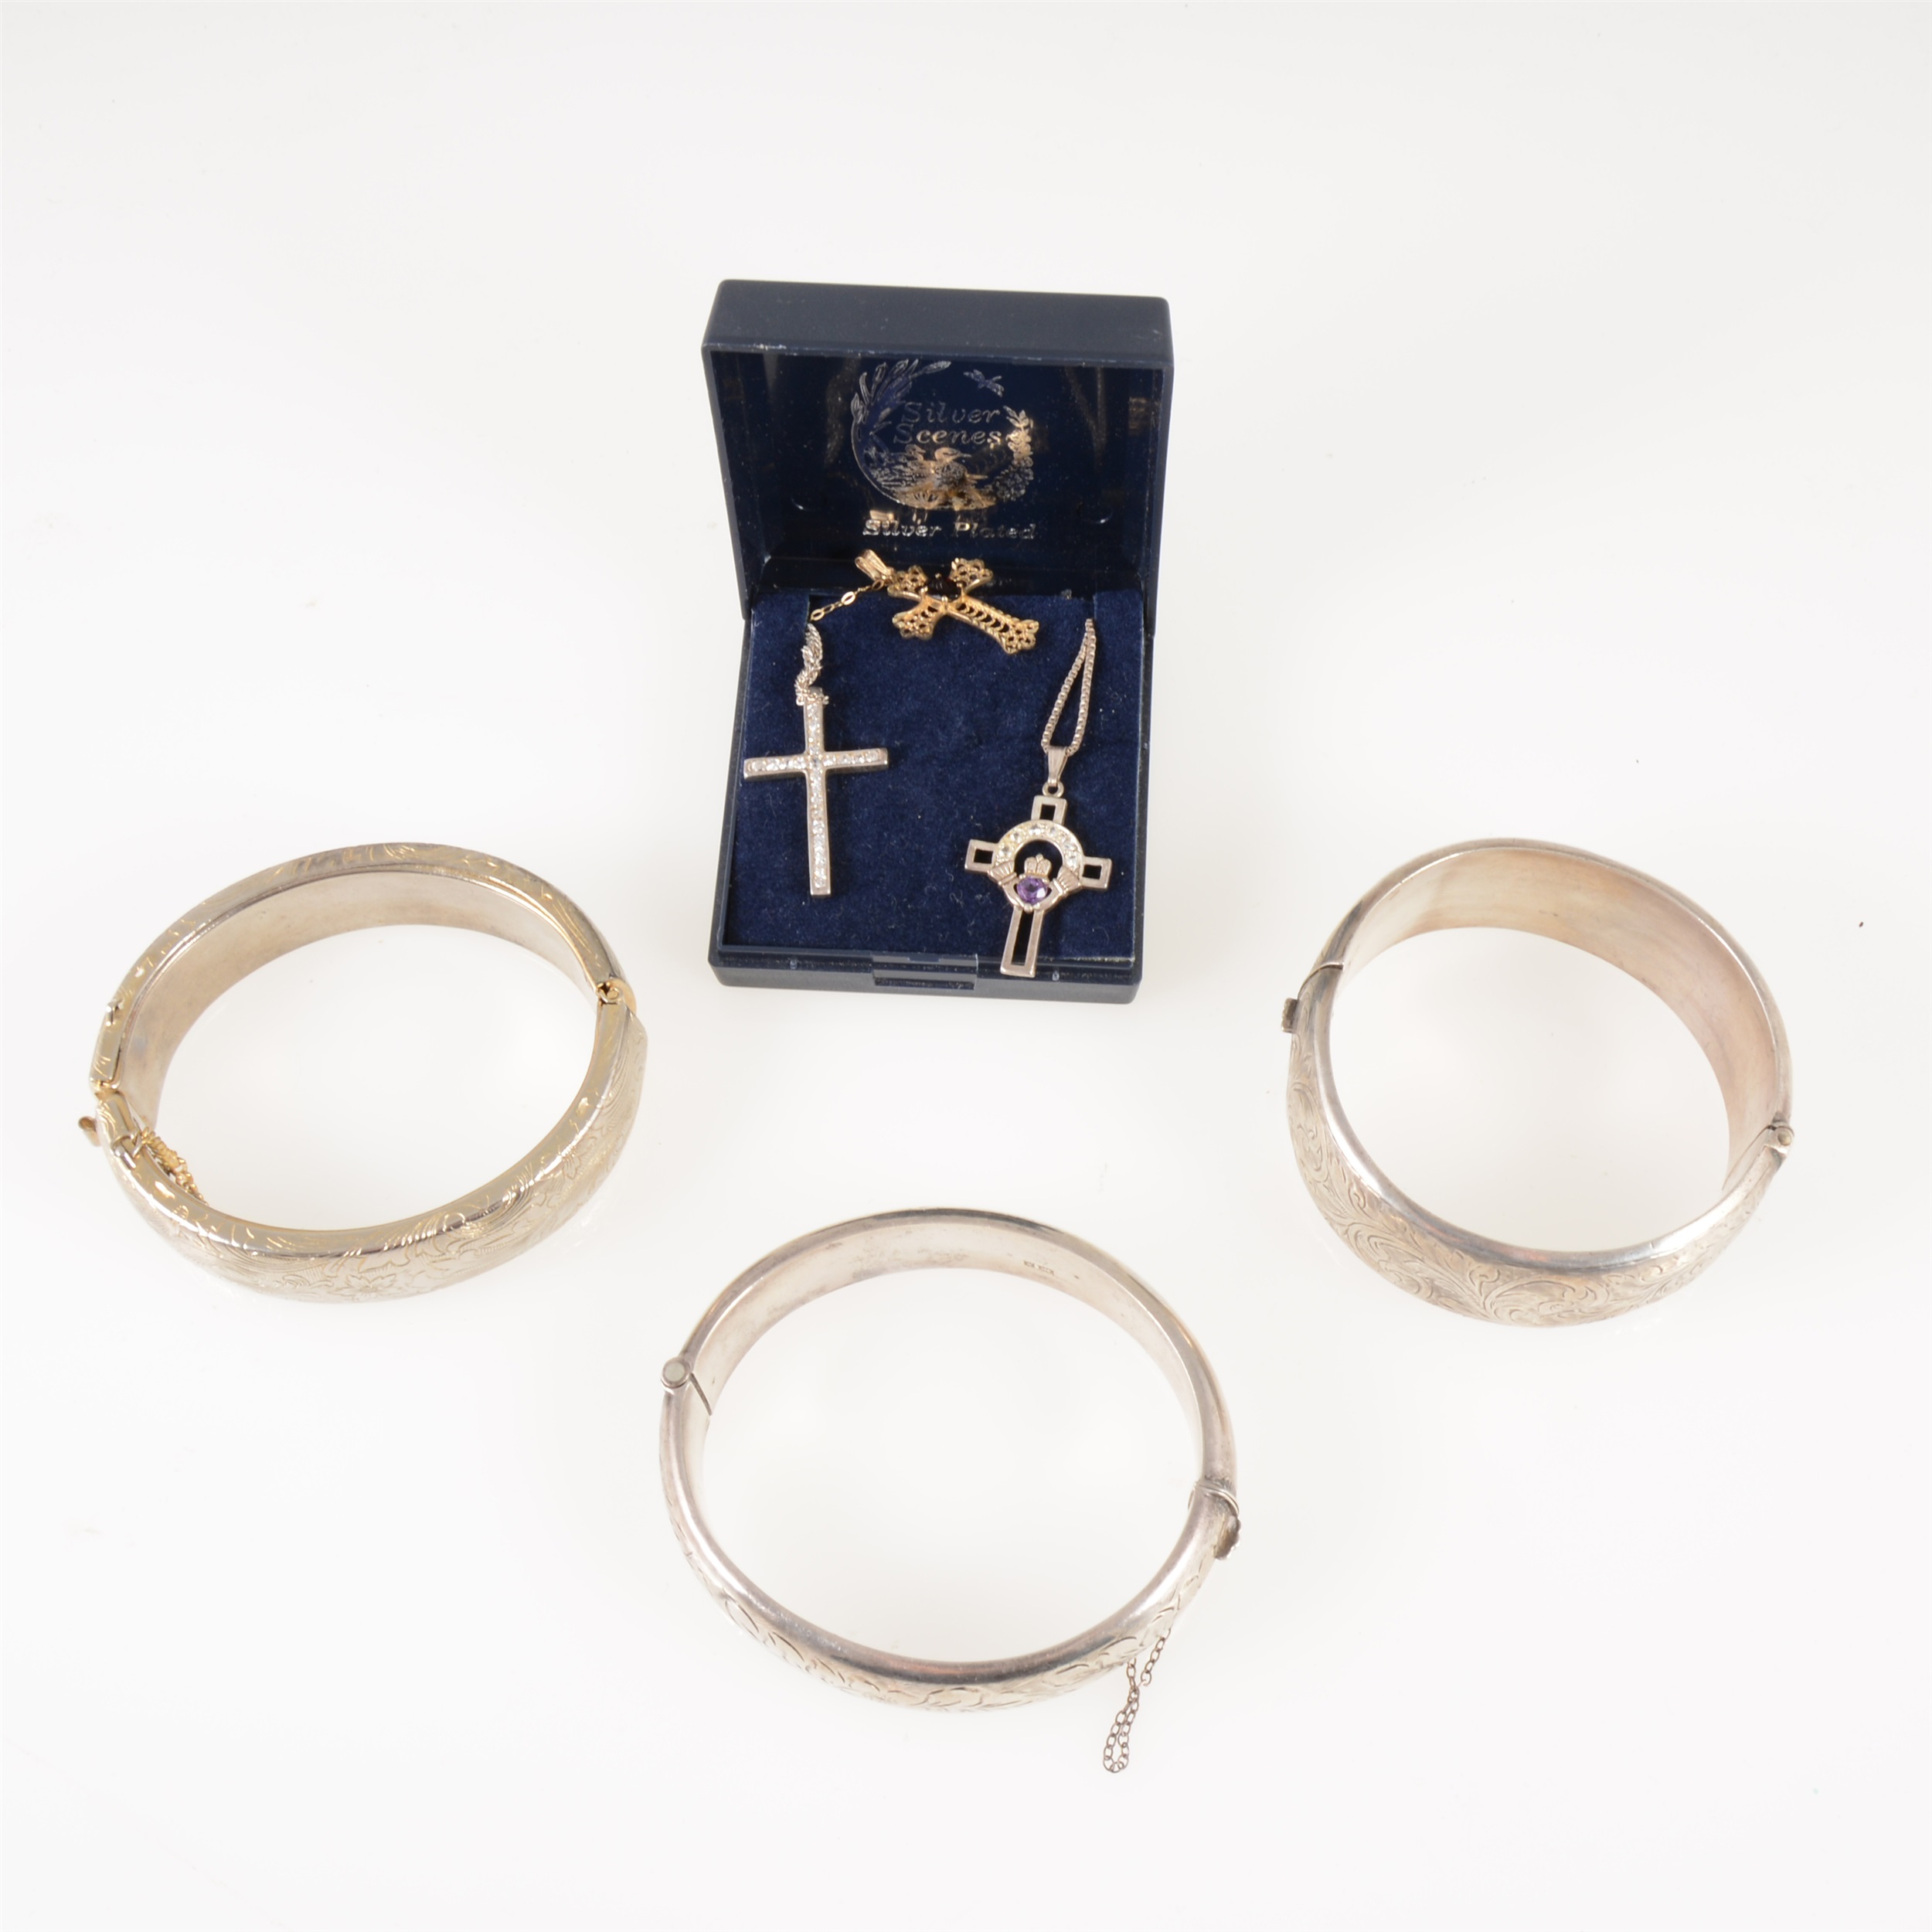 Two silver hollow half hinged bangles 16mm, 23mm, a metal bangle, two pairs of gilt metal cufflinks,